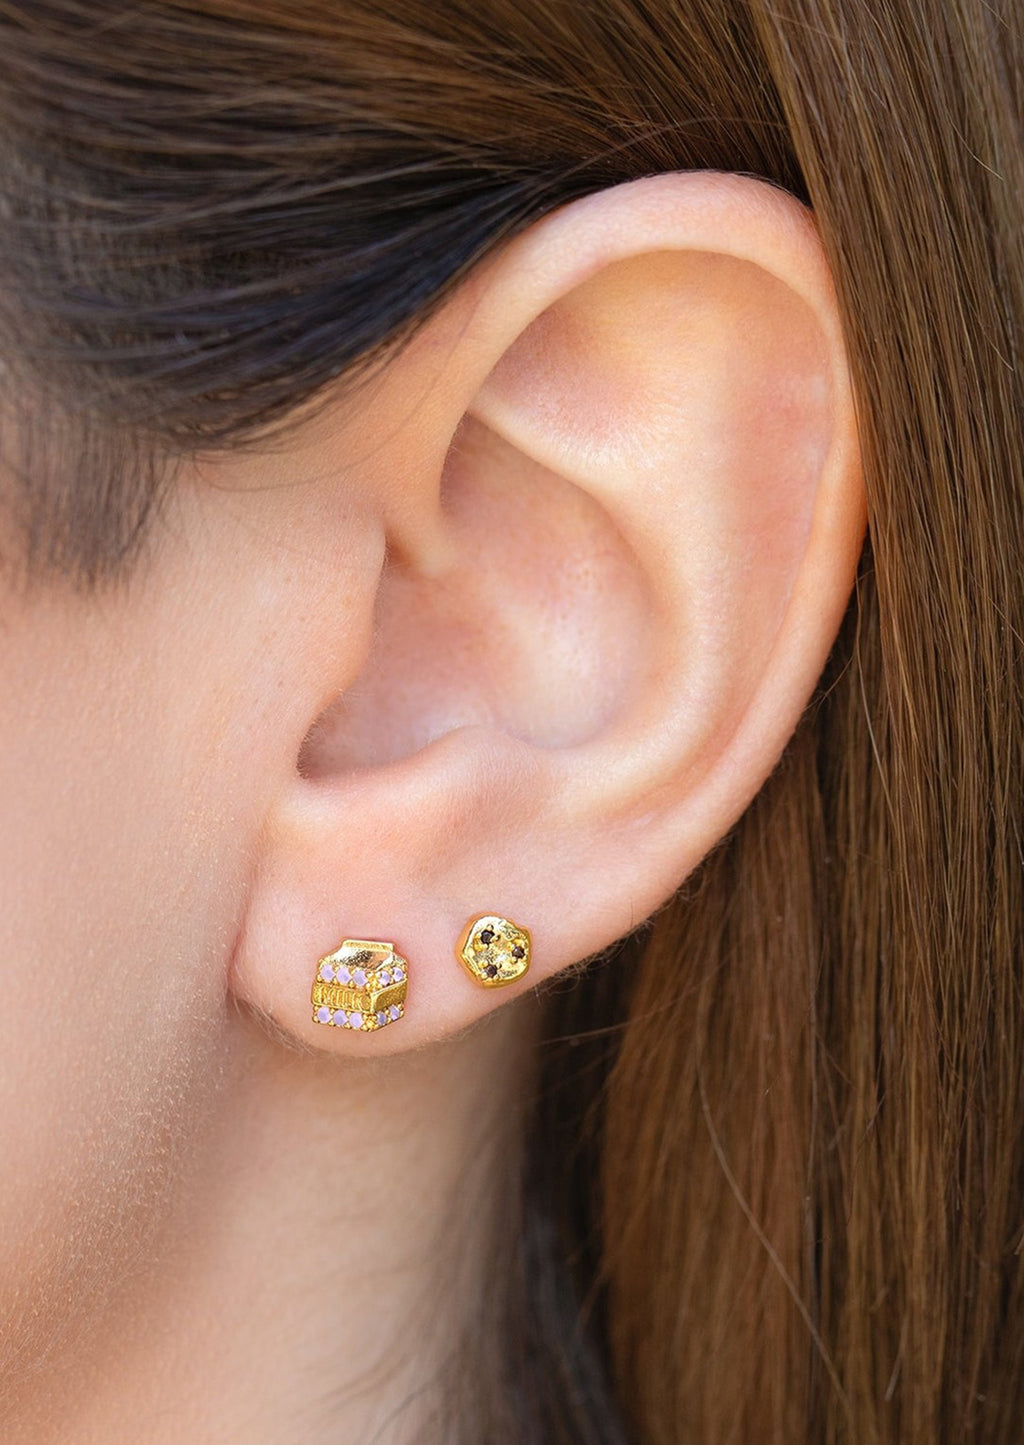 2: A pair of gold stud earrings in mismatched milk and cookies.